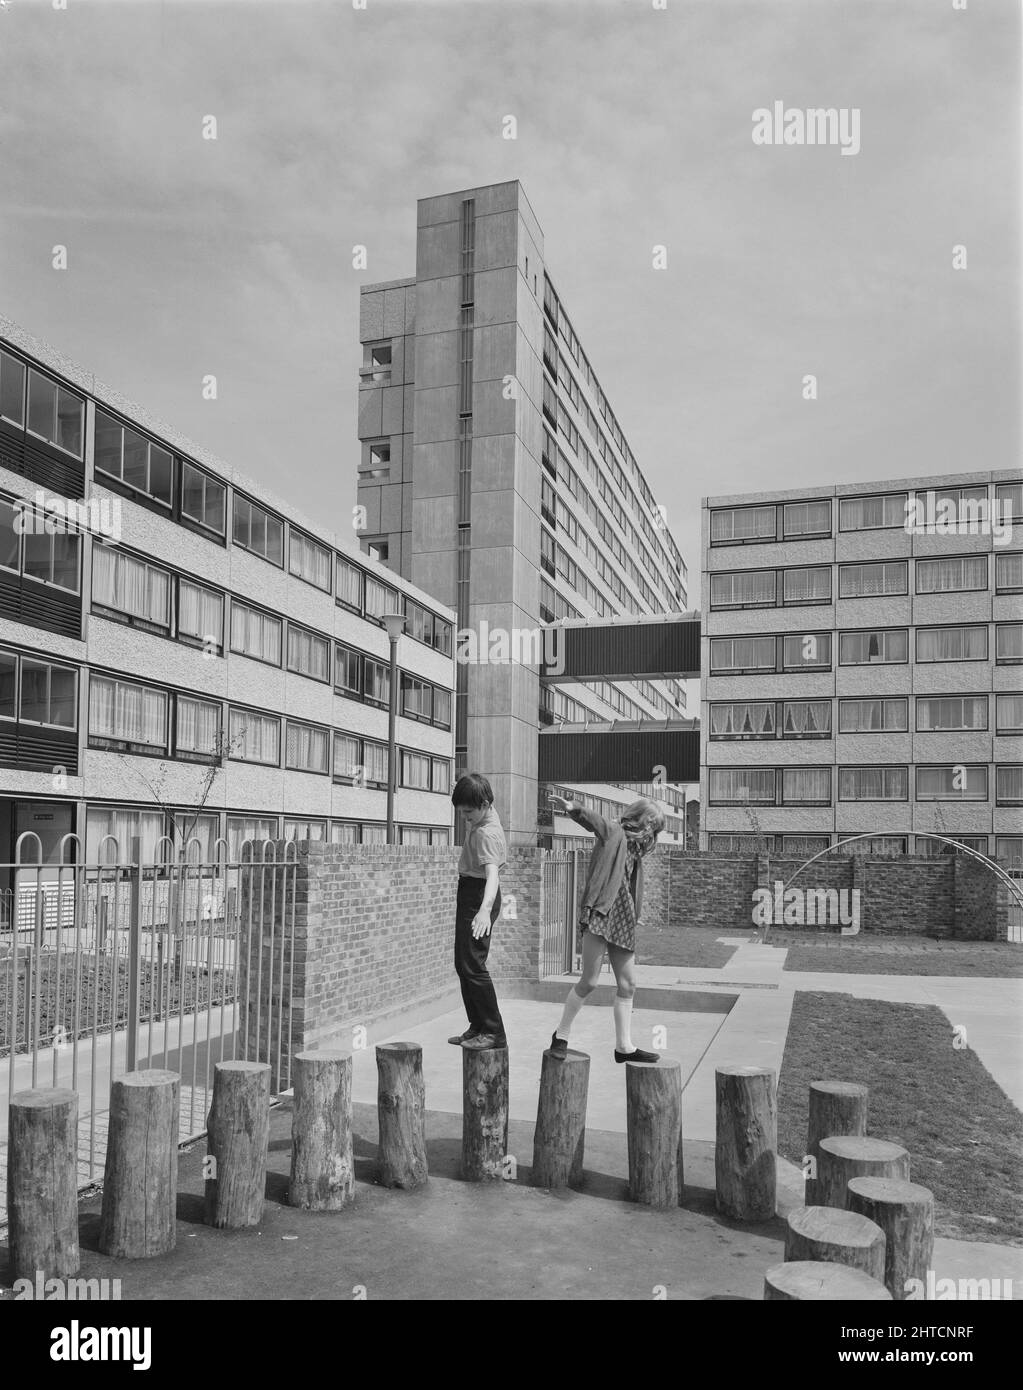 Pooles Park, Finsbury Park, Islington, London, 20/05/1970. Two children playing on posts in a playground besides blocks of flats at Pooles Park, built using the 12M Jespersen system. In 1963, John Laing and Son Ltd bought the rights to the Danish industrialised building system for flats known as Jespersen (sometimes referred to as Jesperson). The company built factories in Scotland, Hampshire and Lancashire producing Jespersen prefabricated parts and precast concrete panels, allowing the building of housing to be rationalised, saving time and money. The Pooles Park development was built by Lai Stock Photo